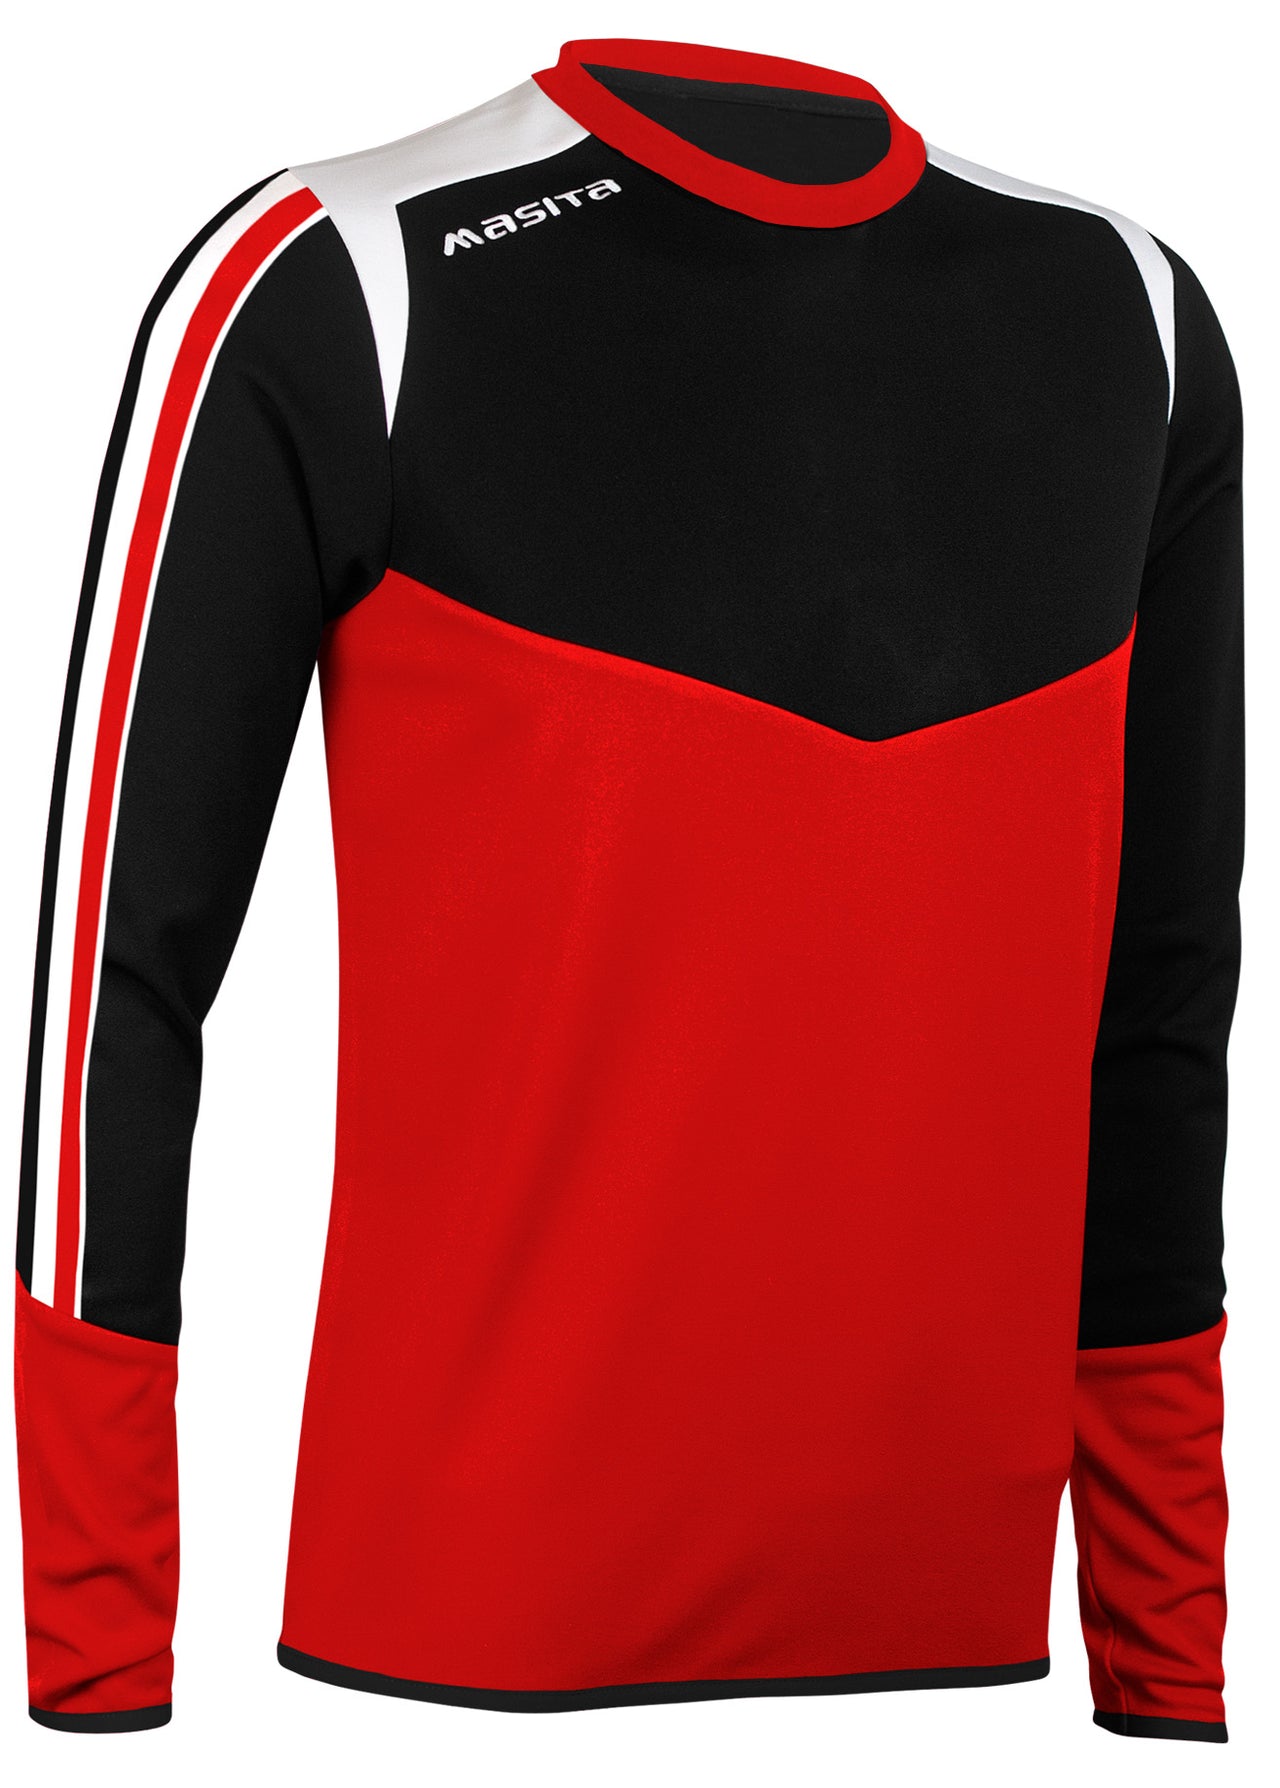 Montana Sweater Red/Black/White Adult